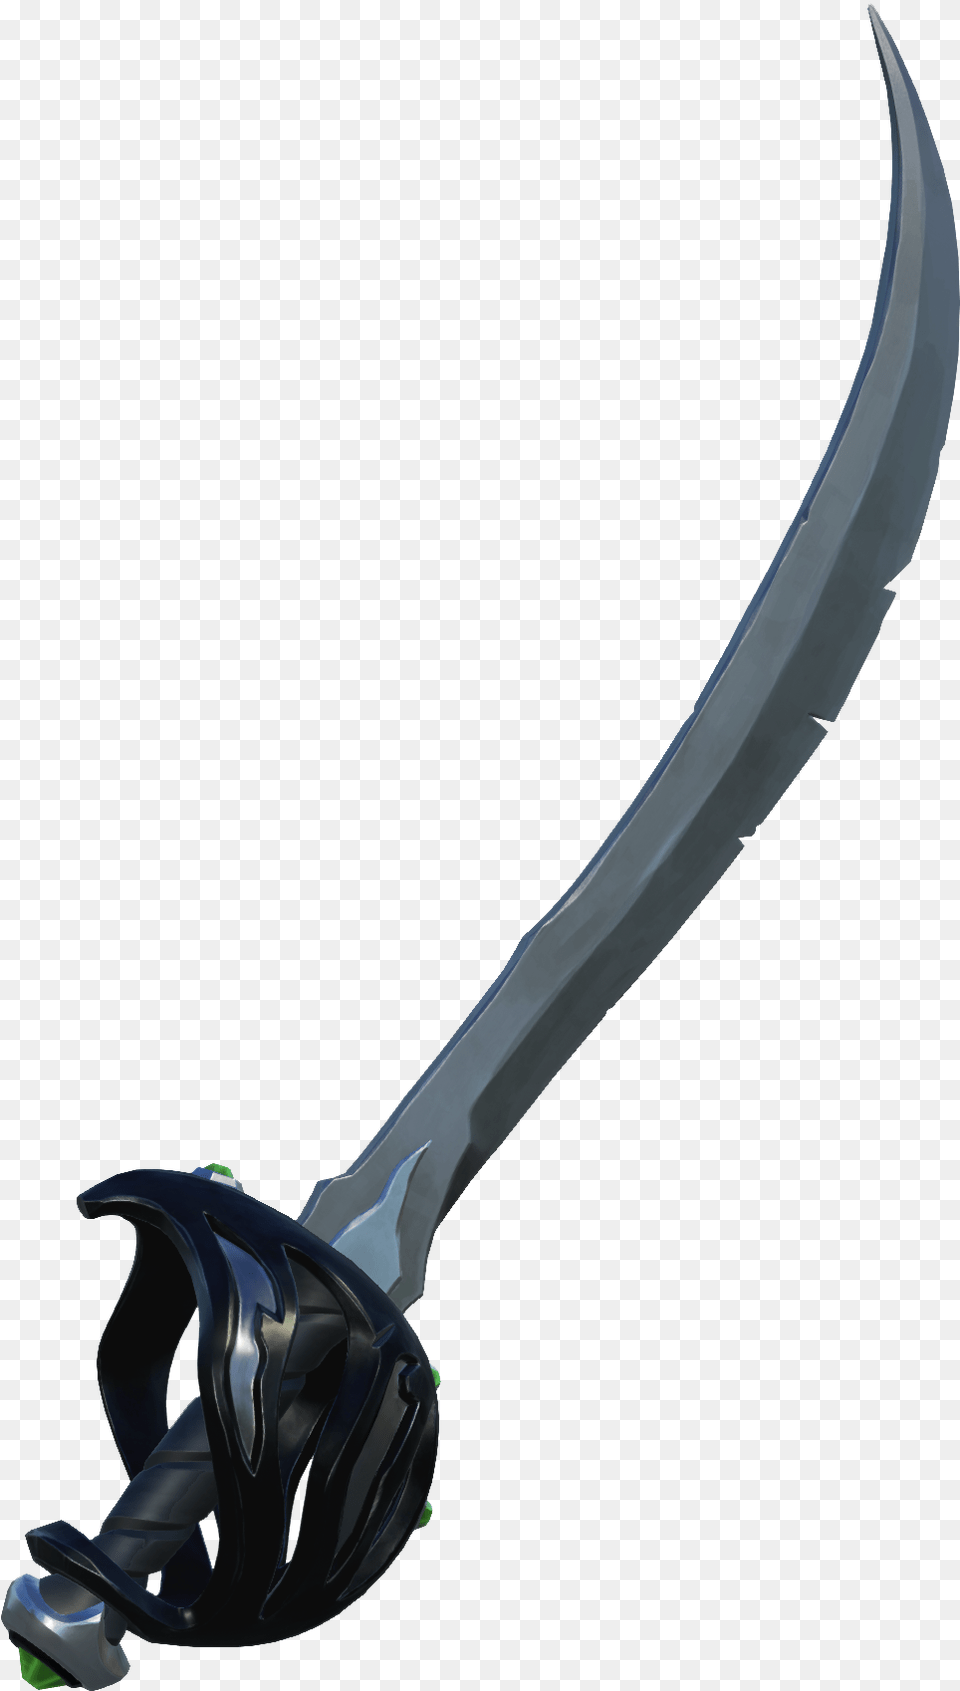 Sea Of Thieves Black Dog Pack Cutlass Sea Of Thieves Pirate Sword, Blade, Dagger, Knife, Weapon Free Png